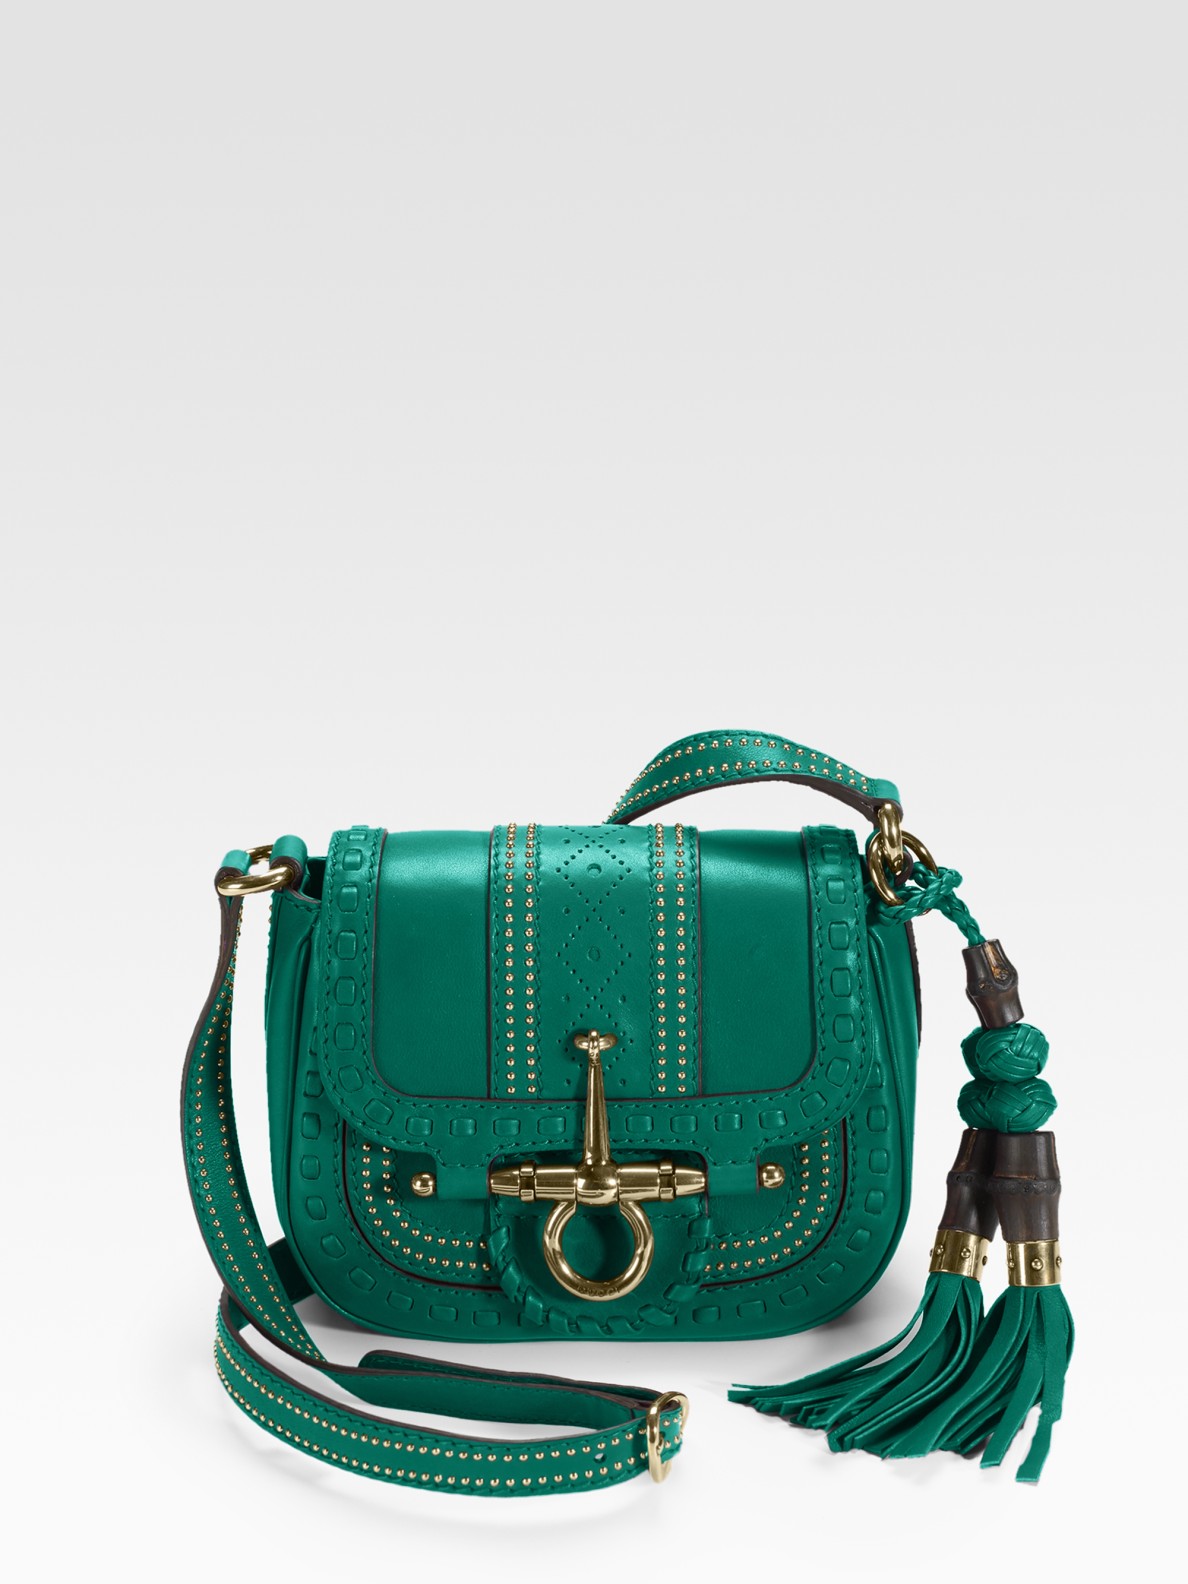 Gucci Snaffle Bit Small Flap Leather Shoulder Bag in Green - Lyst